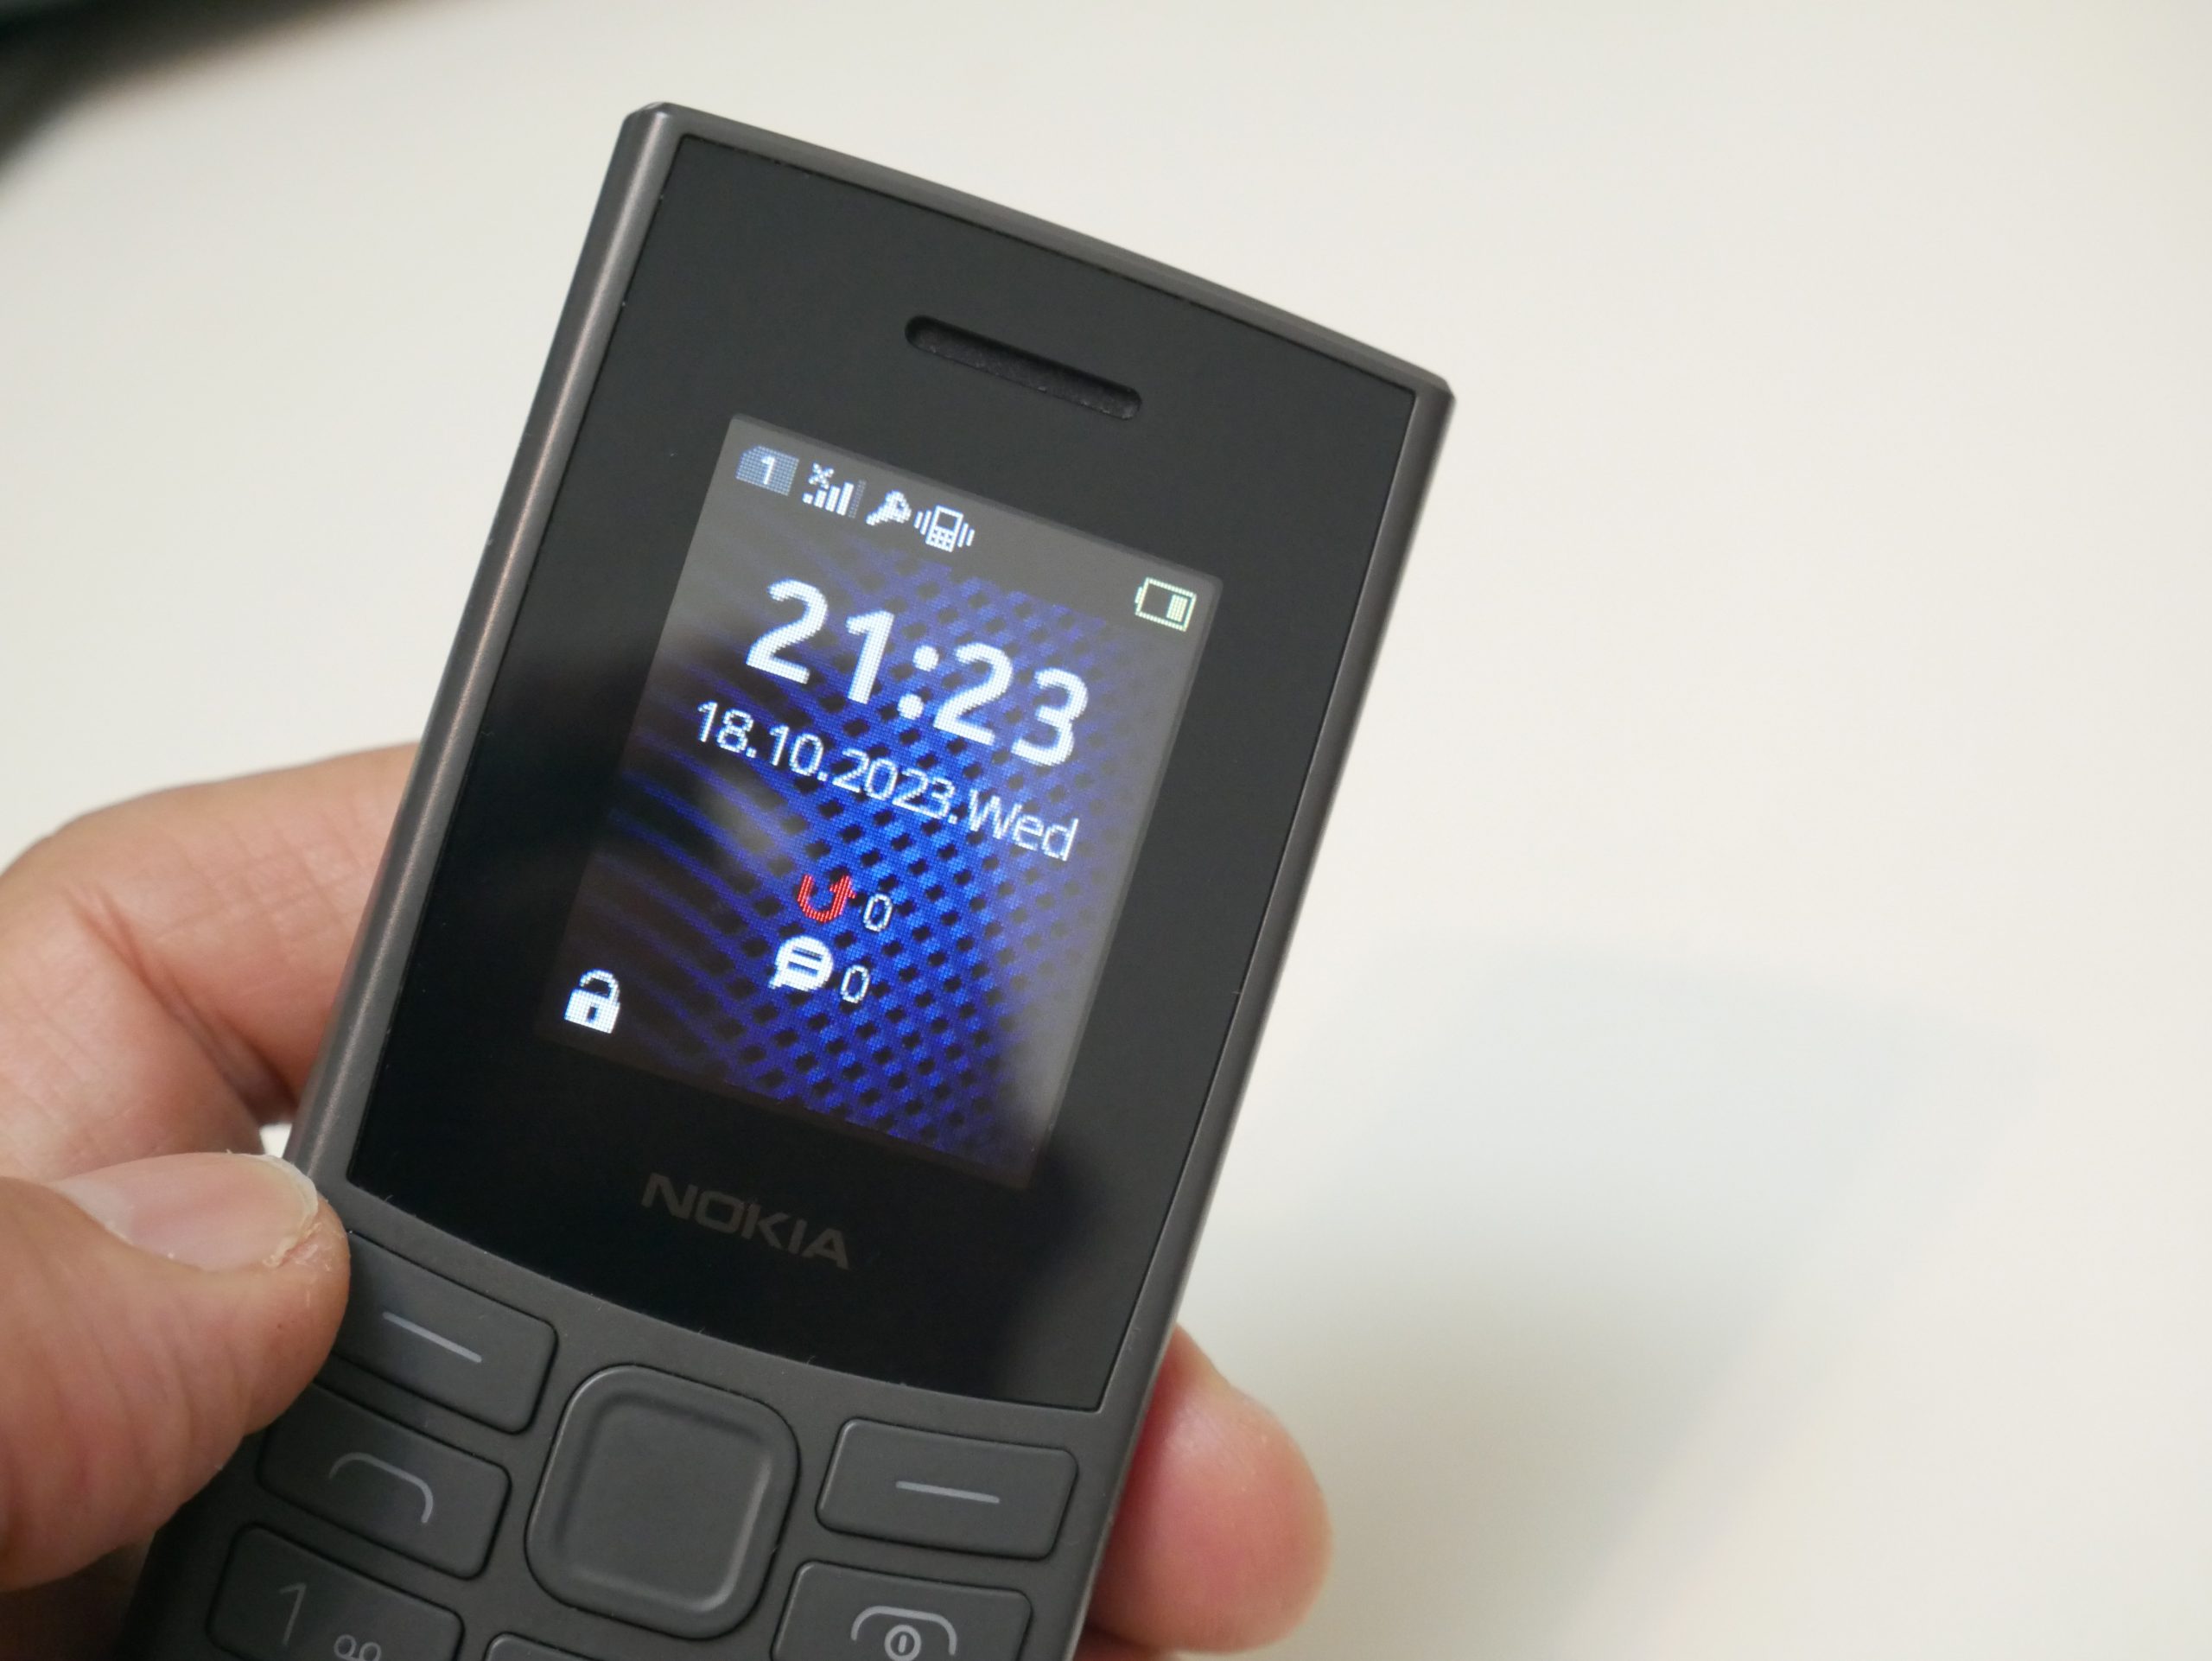 MP3, Review and 105 – in 2023 80 Browser, Nokia FM more, grams under 4G